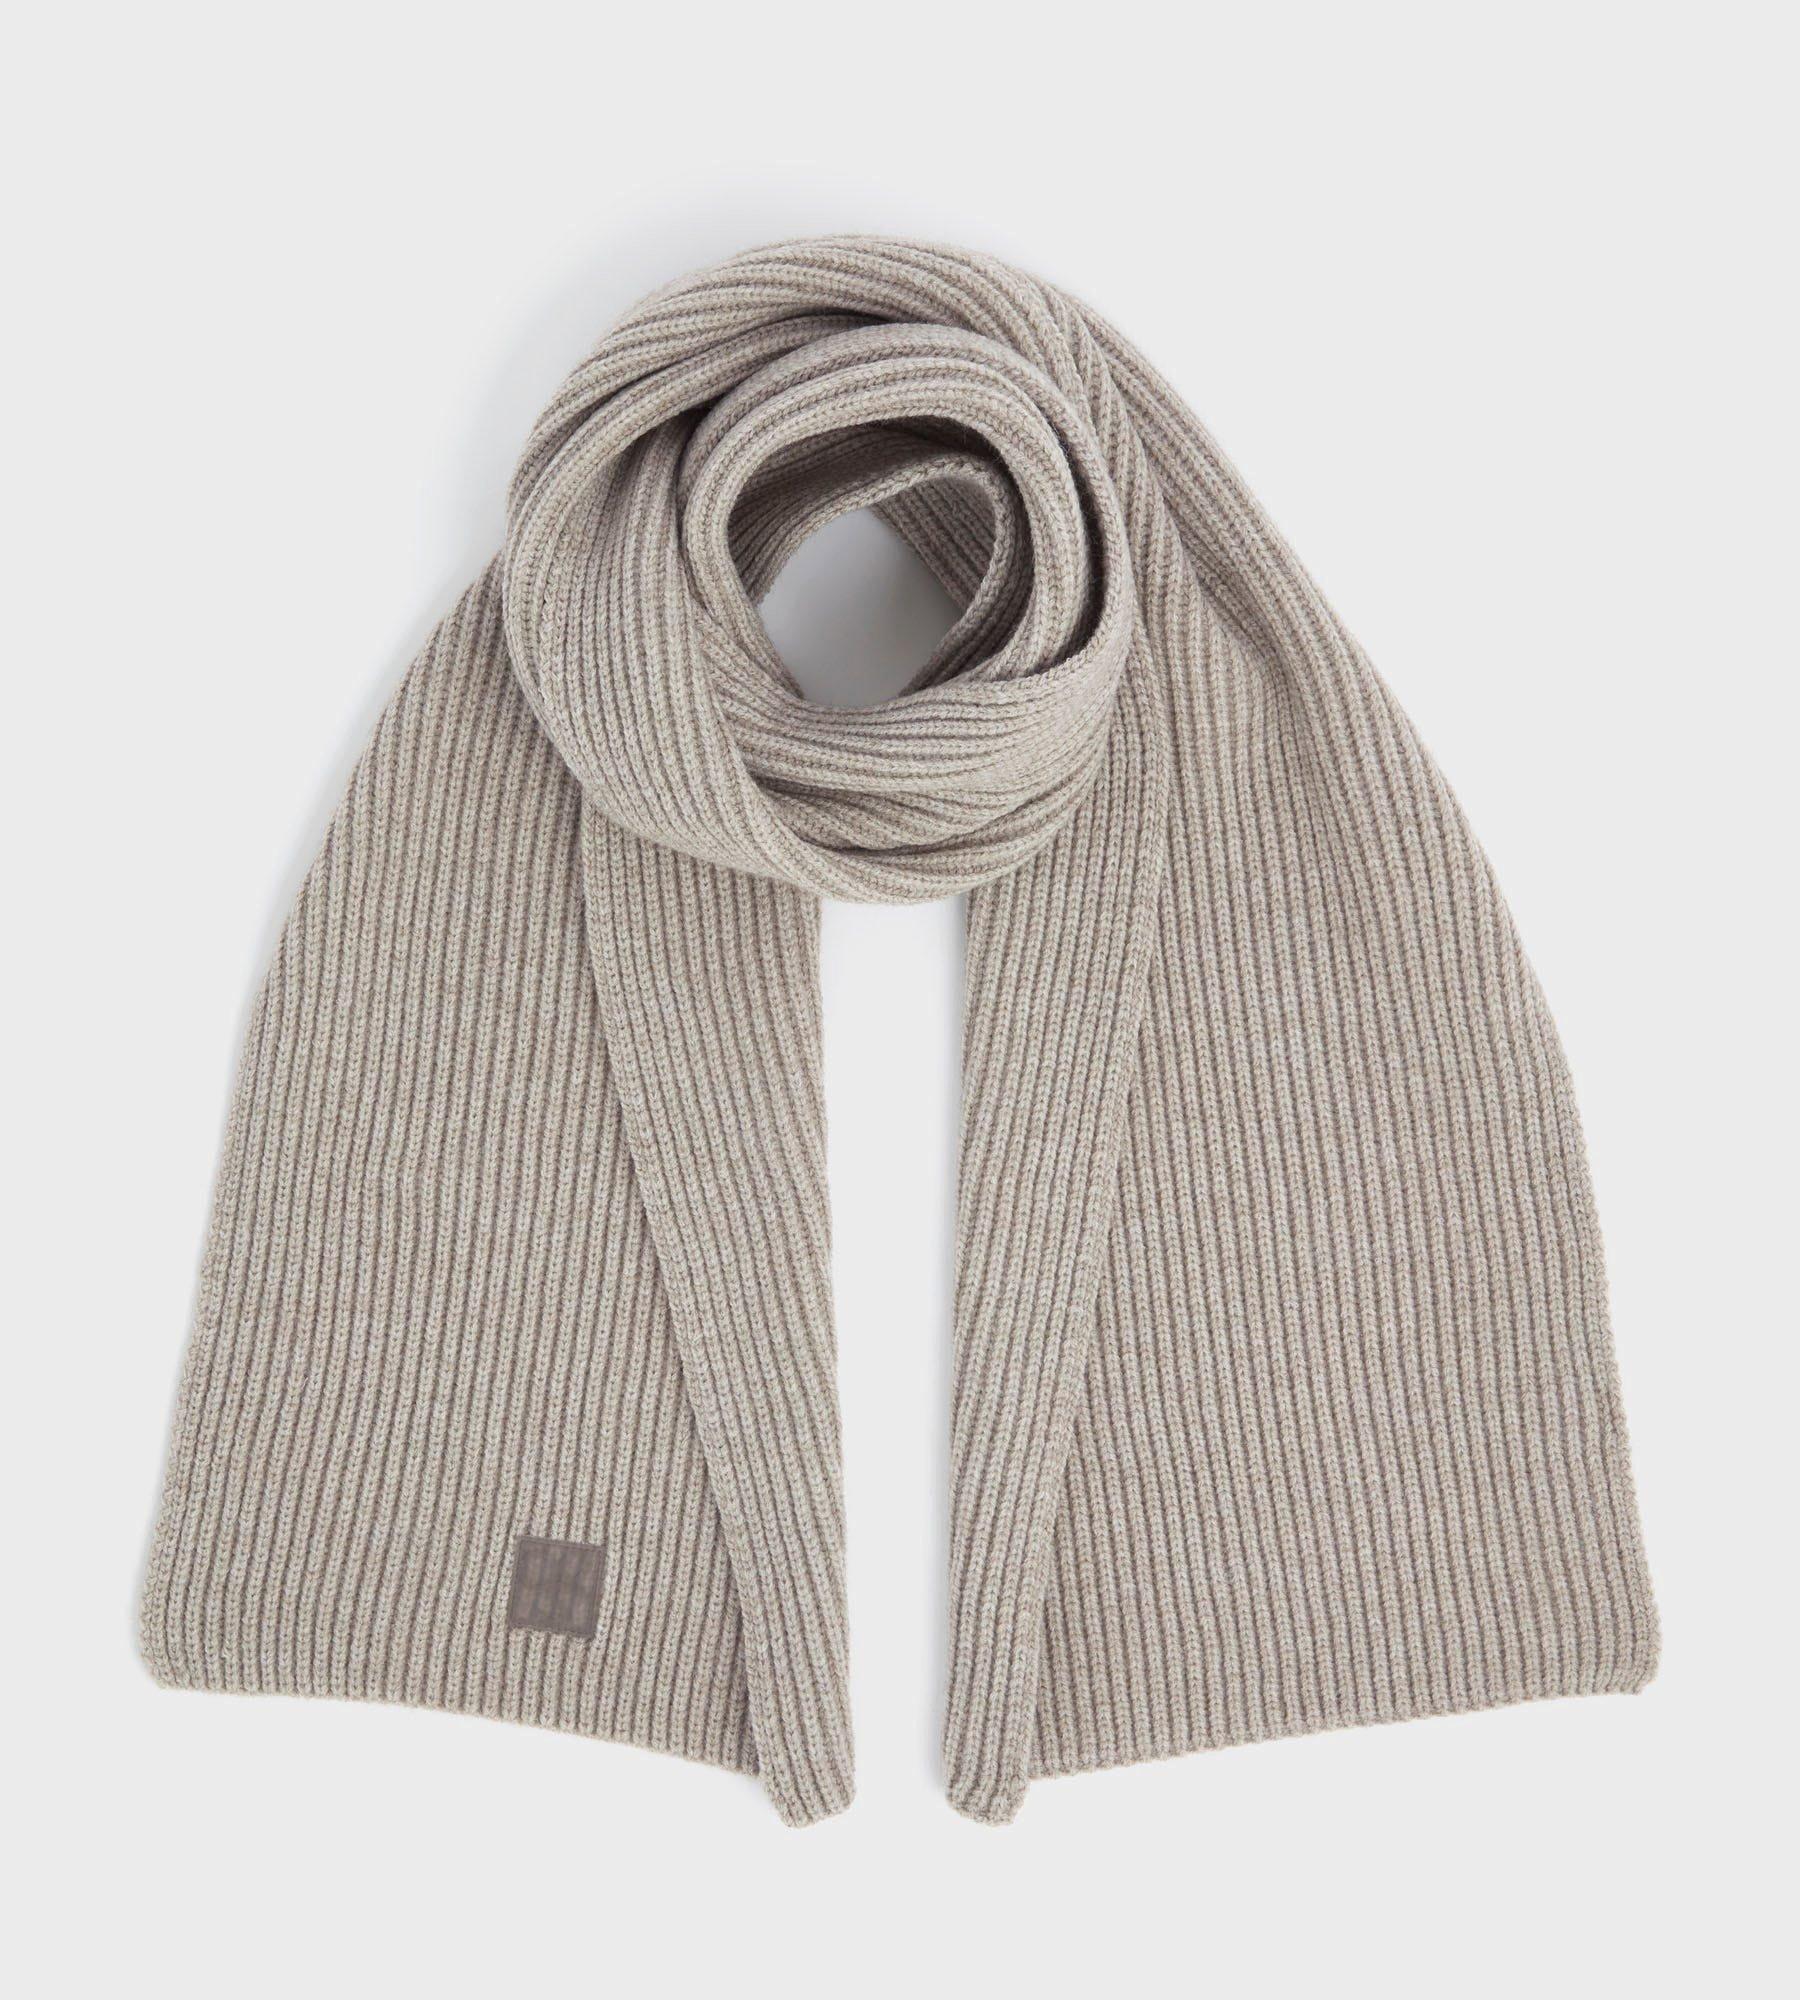 The OSP Ribbed Scarf